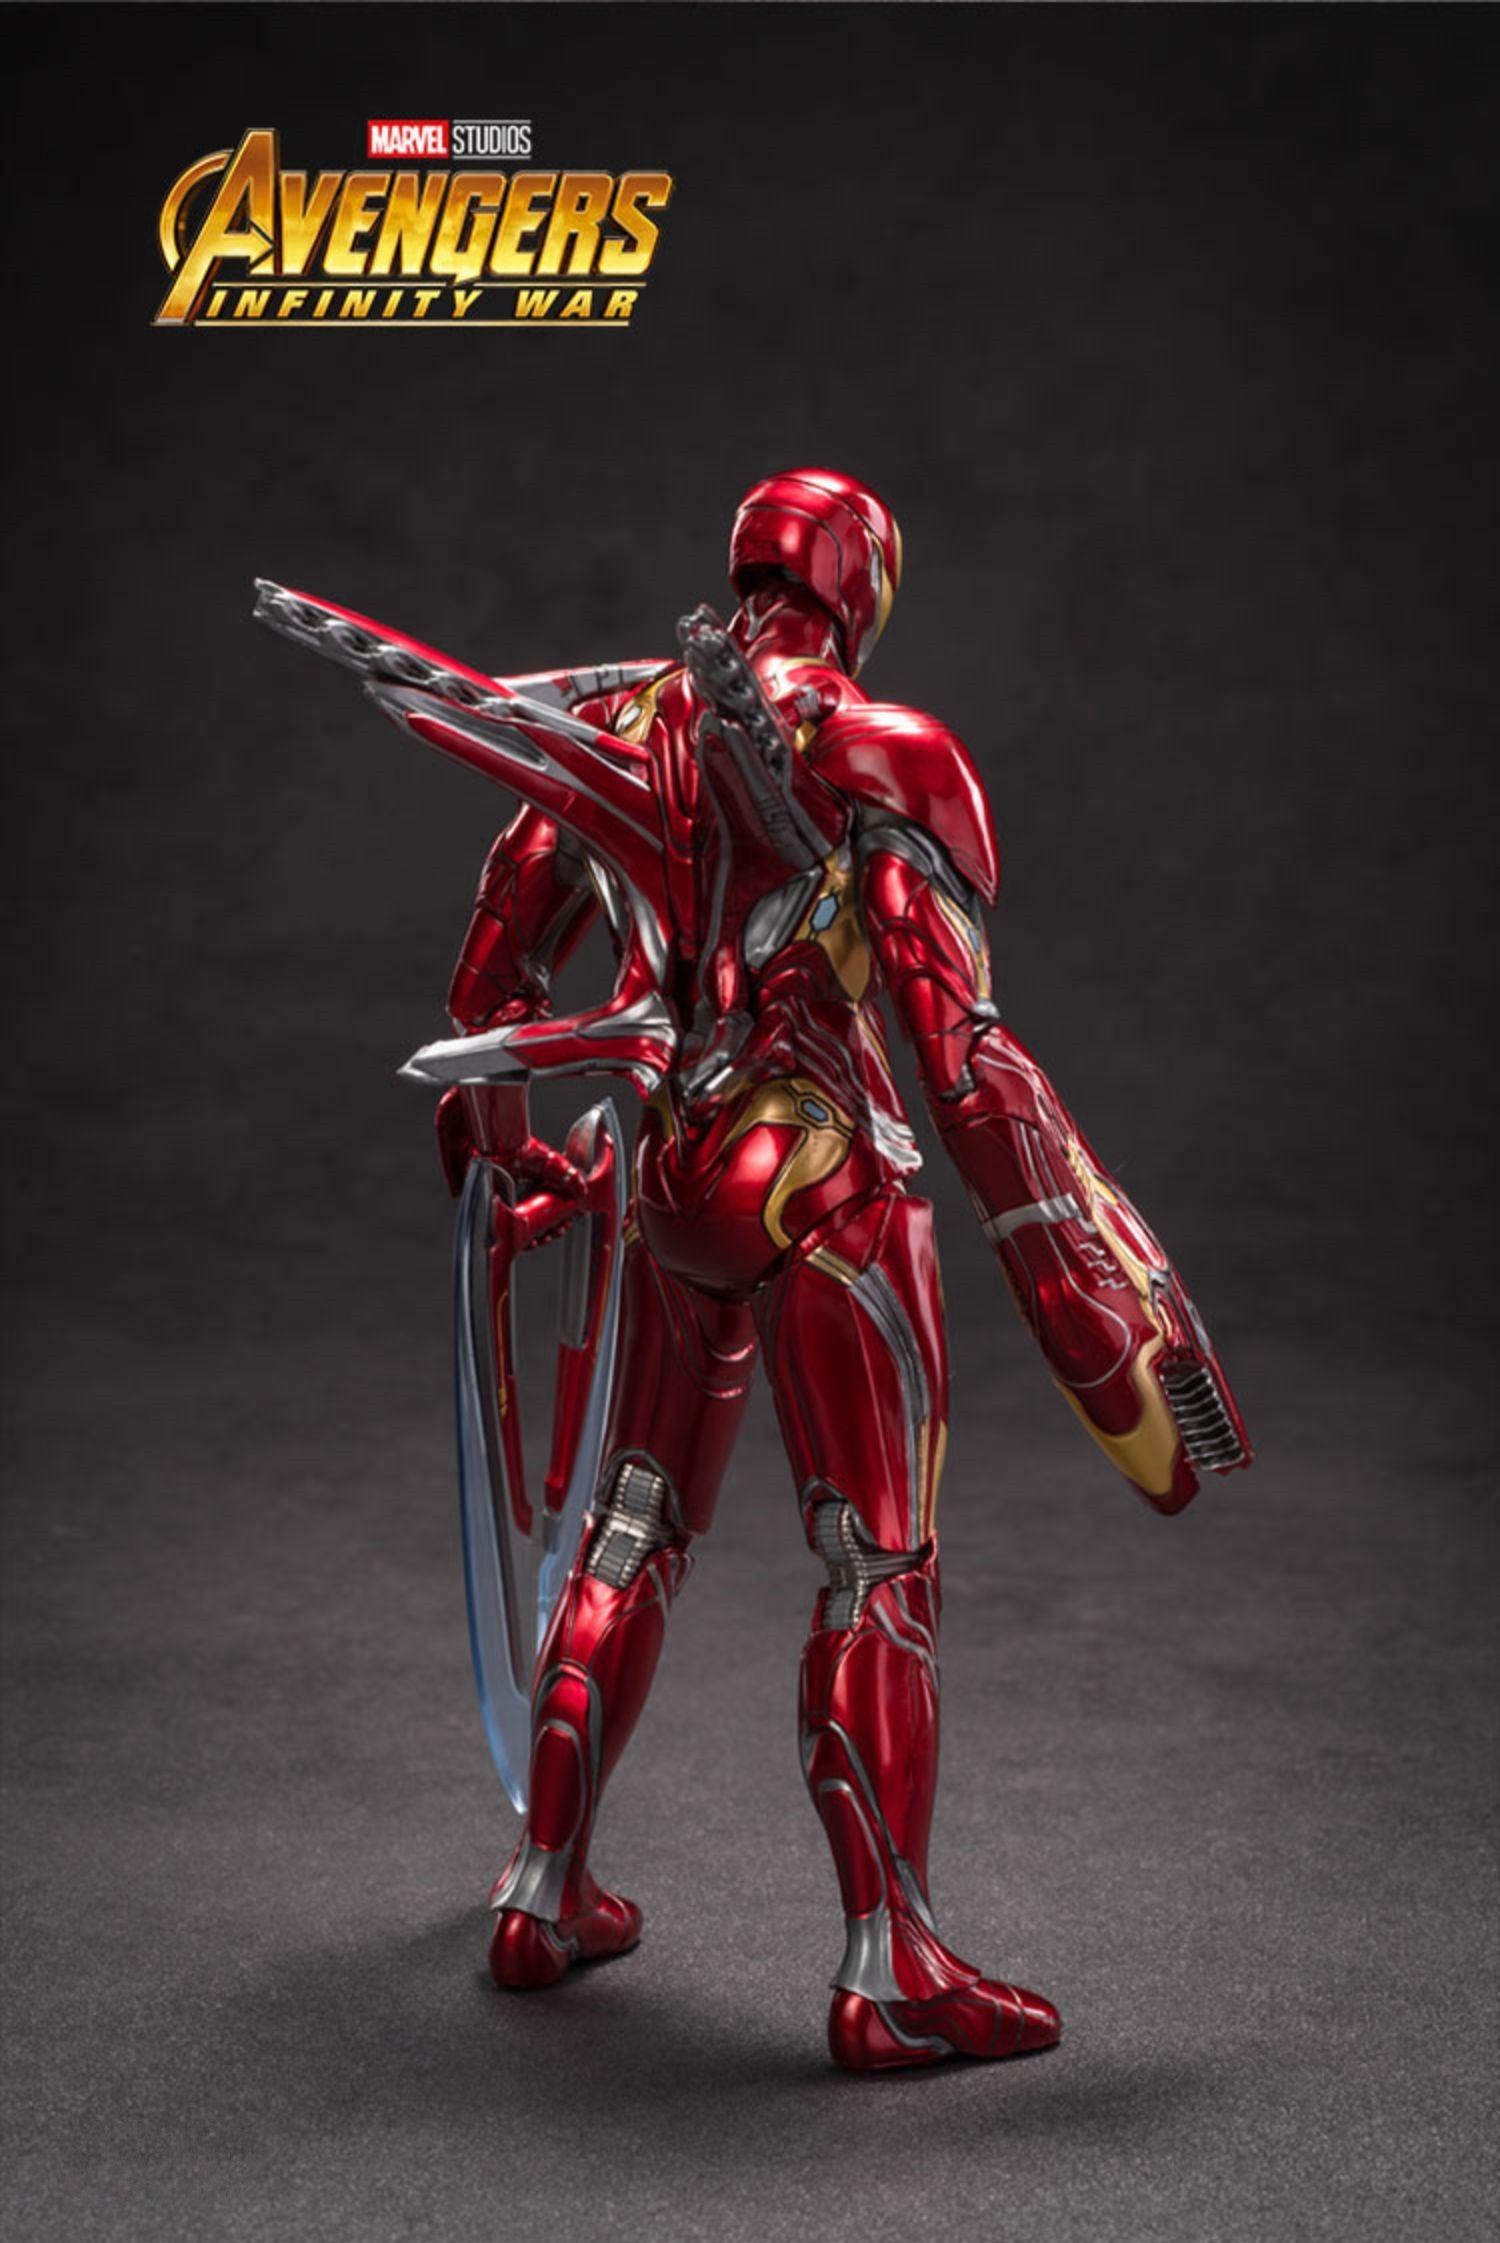 ZD Toys - 1:10 Iron Man Mark L Mk50 Deluxe Action Toy